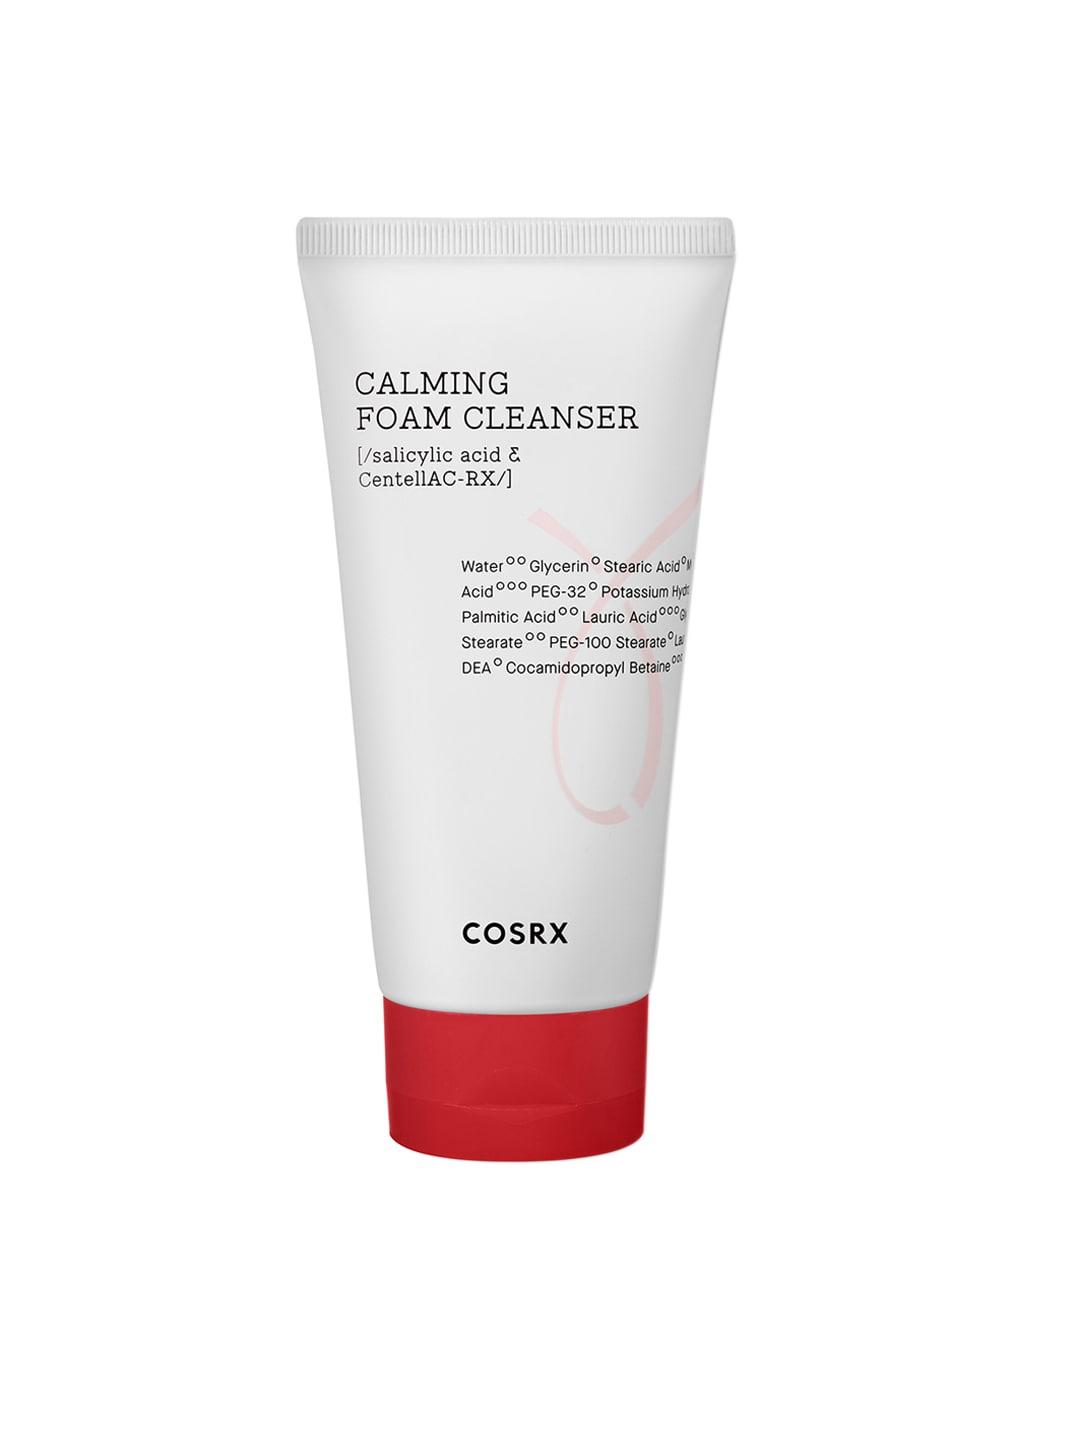 COSRX AC Collection Calming Foam Cleanser with Salicylic Acid Acne Cleanser - 150ml